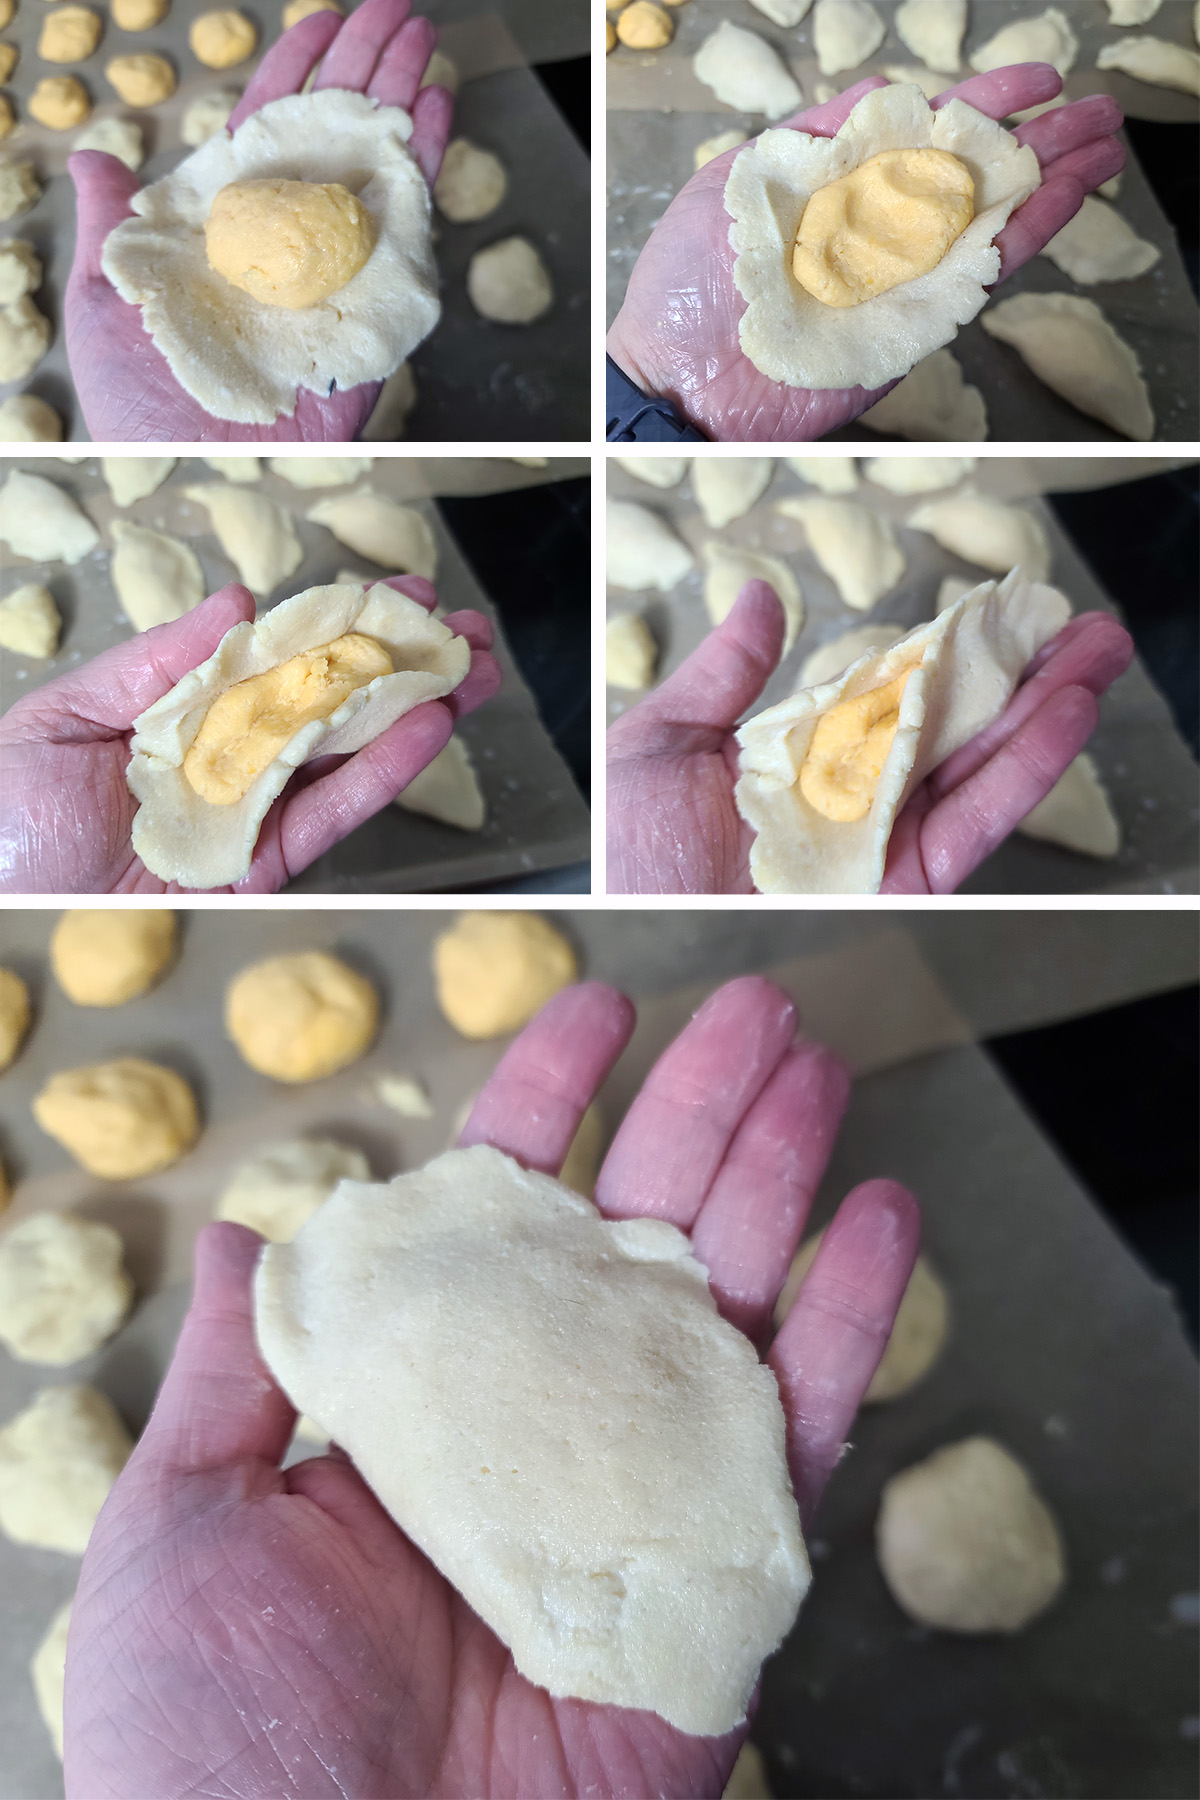 A 5 part image showing a perogie being formed out of a dough ball and a ball of filling.